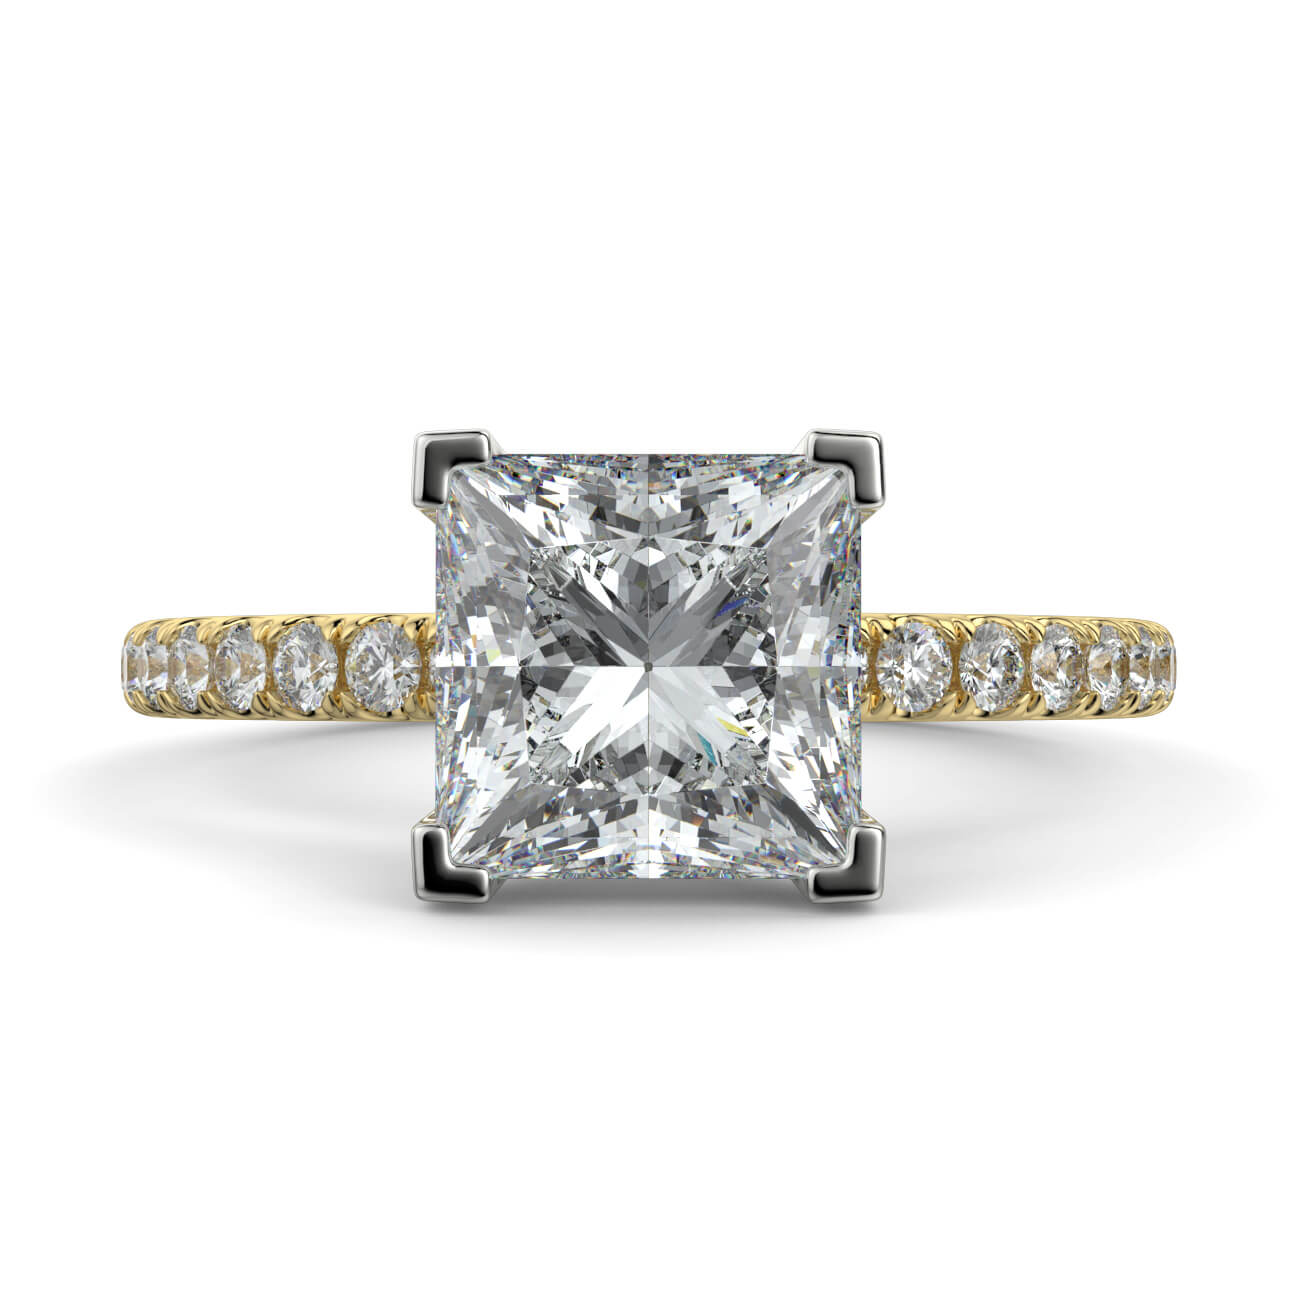 Delicate ‘Liat’ Princess Cut Diamond Engagement Ring in 18k Yellow and White Gold – Australian Diamond Network